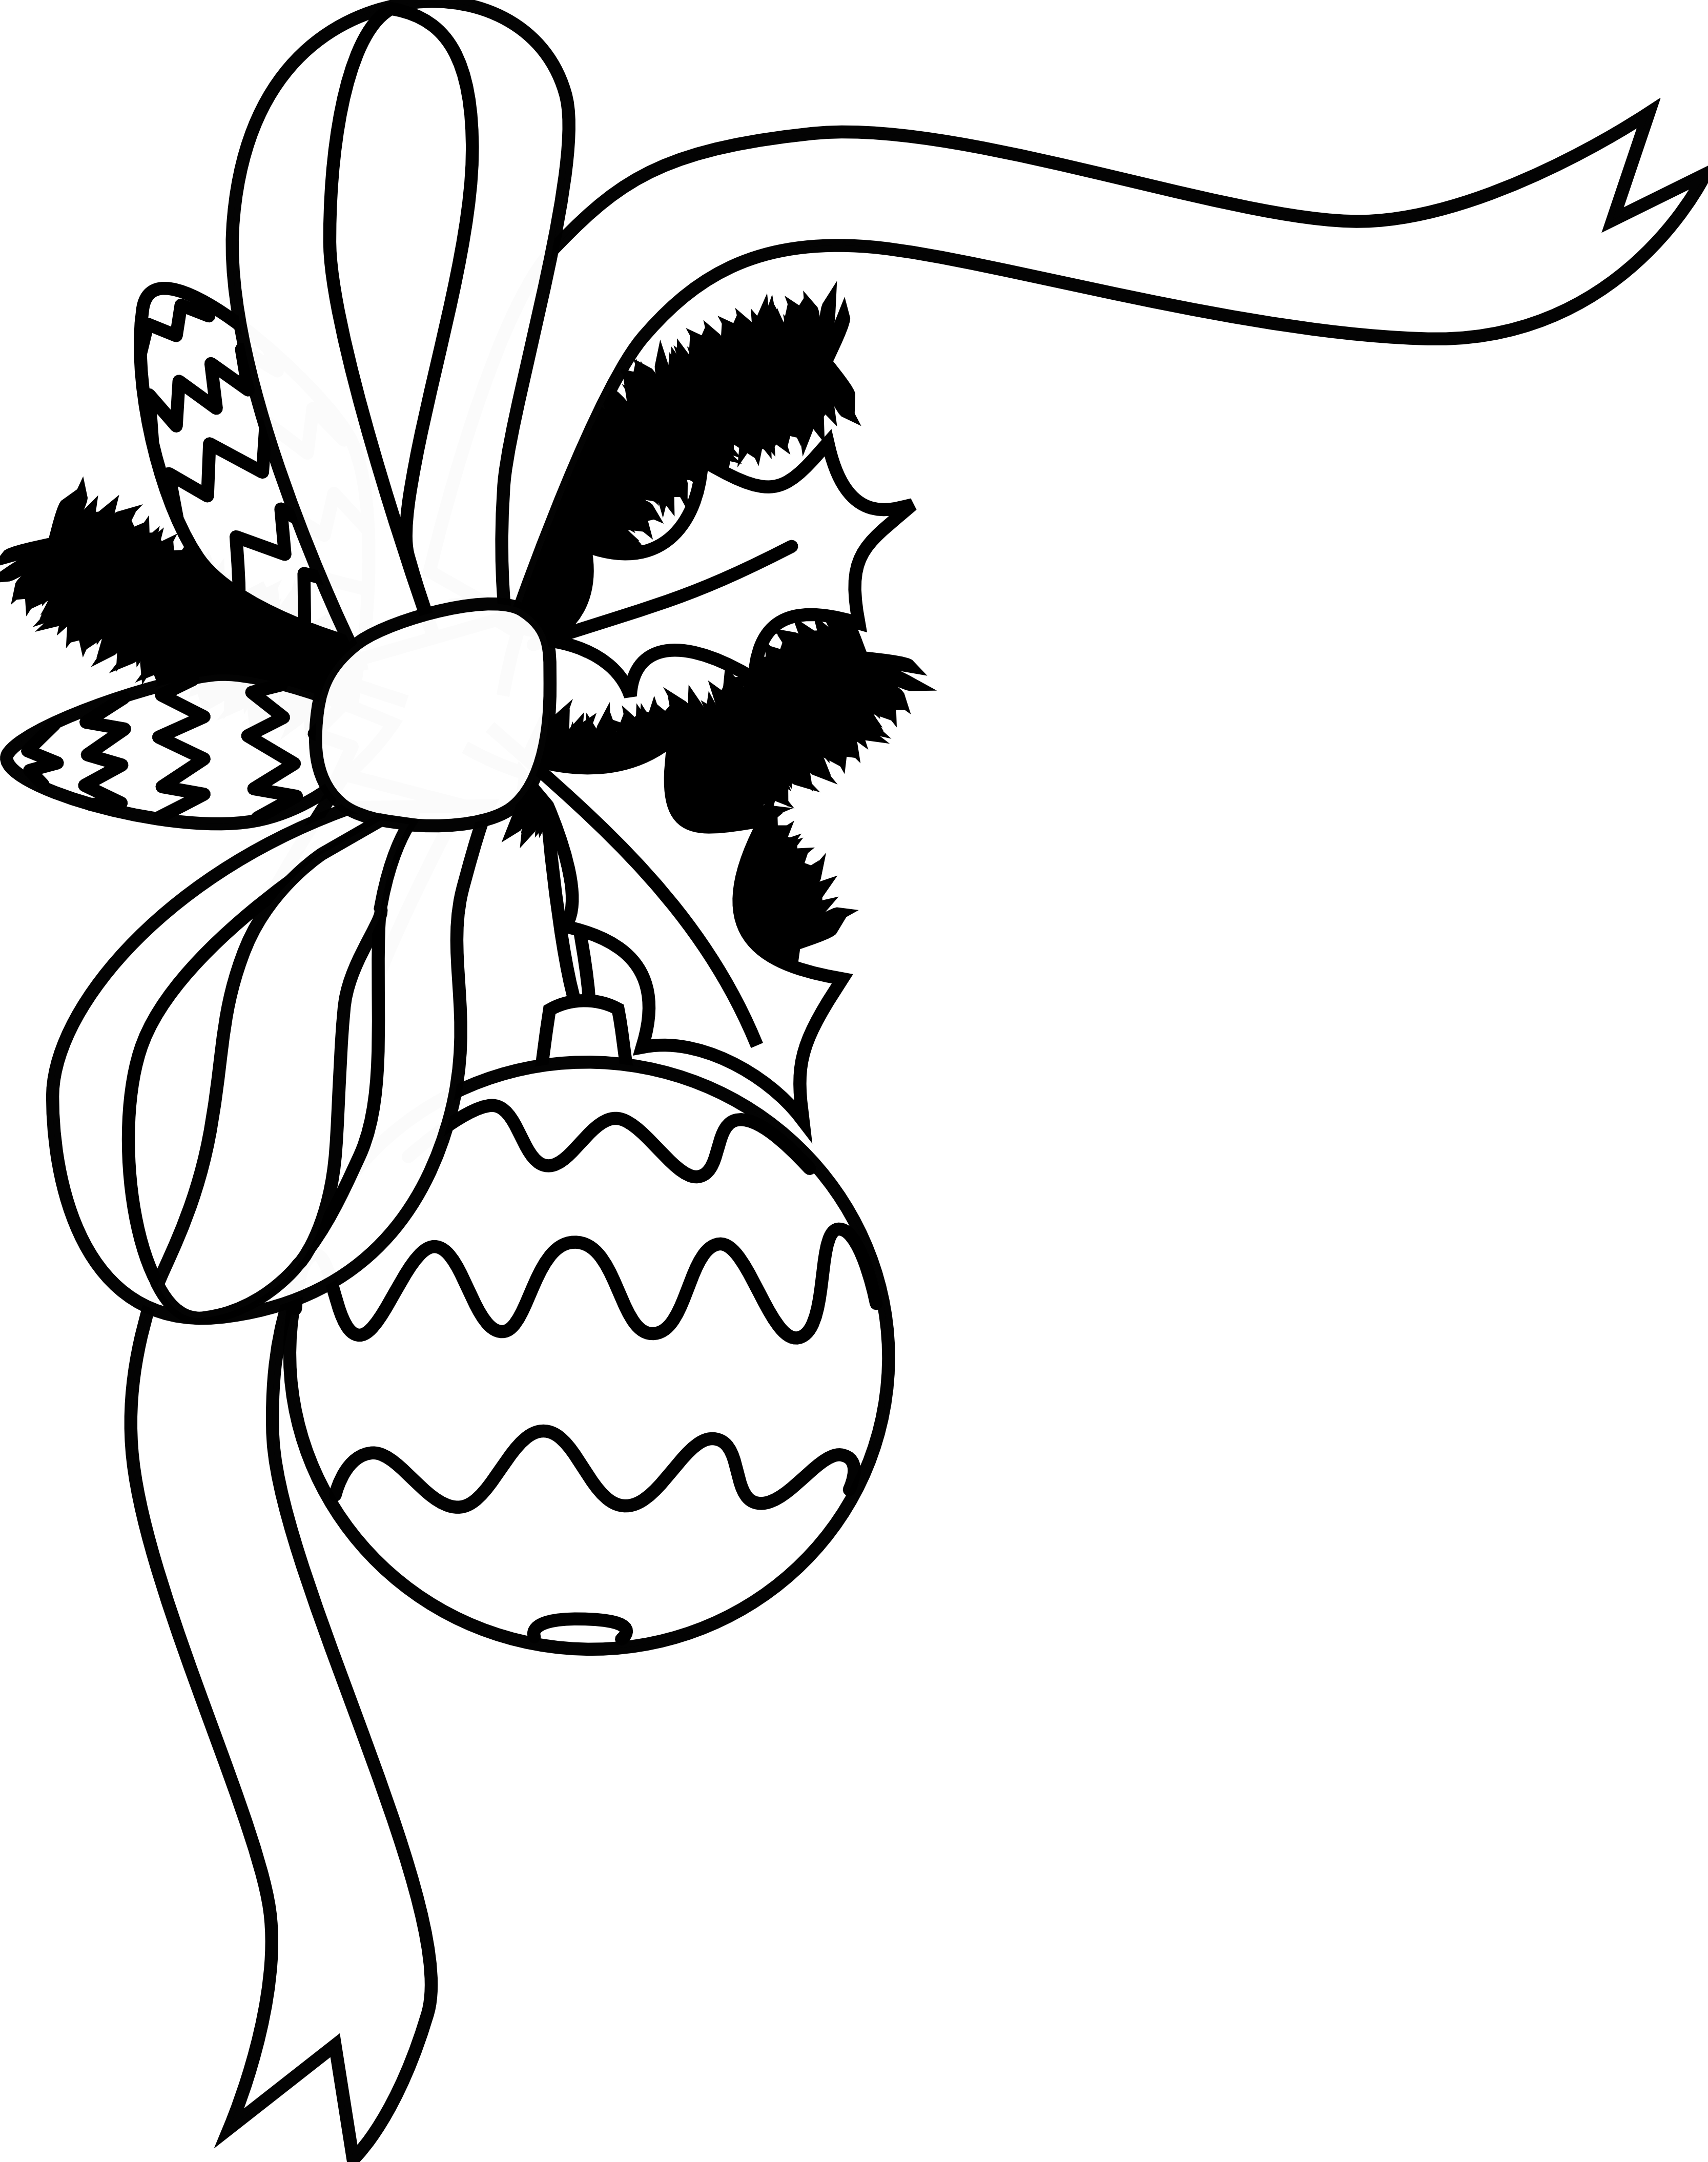 Free christmas images download. Gum clipart black and white